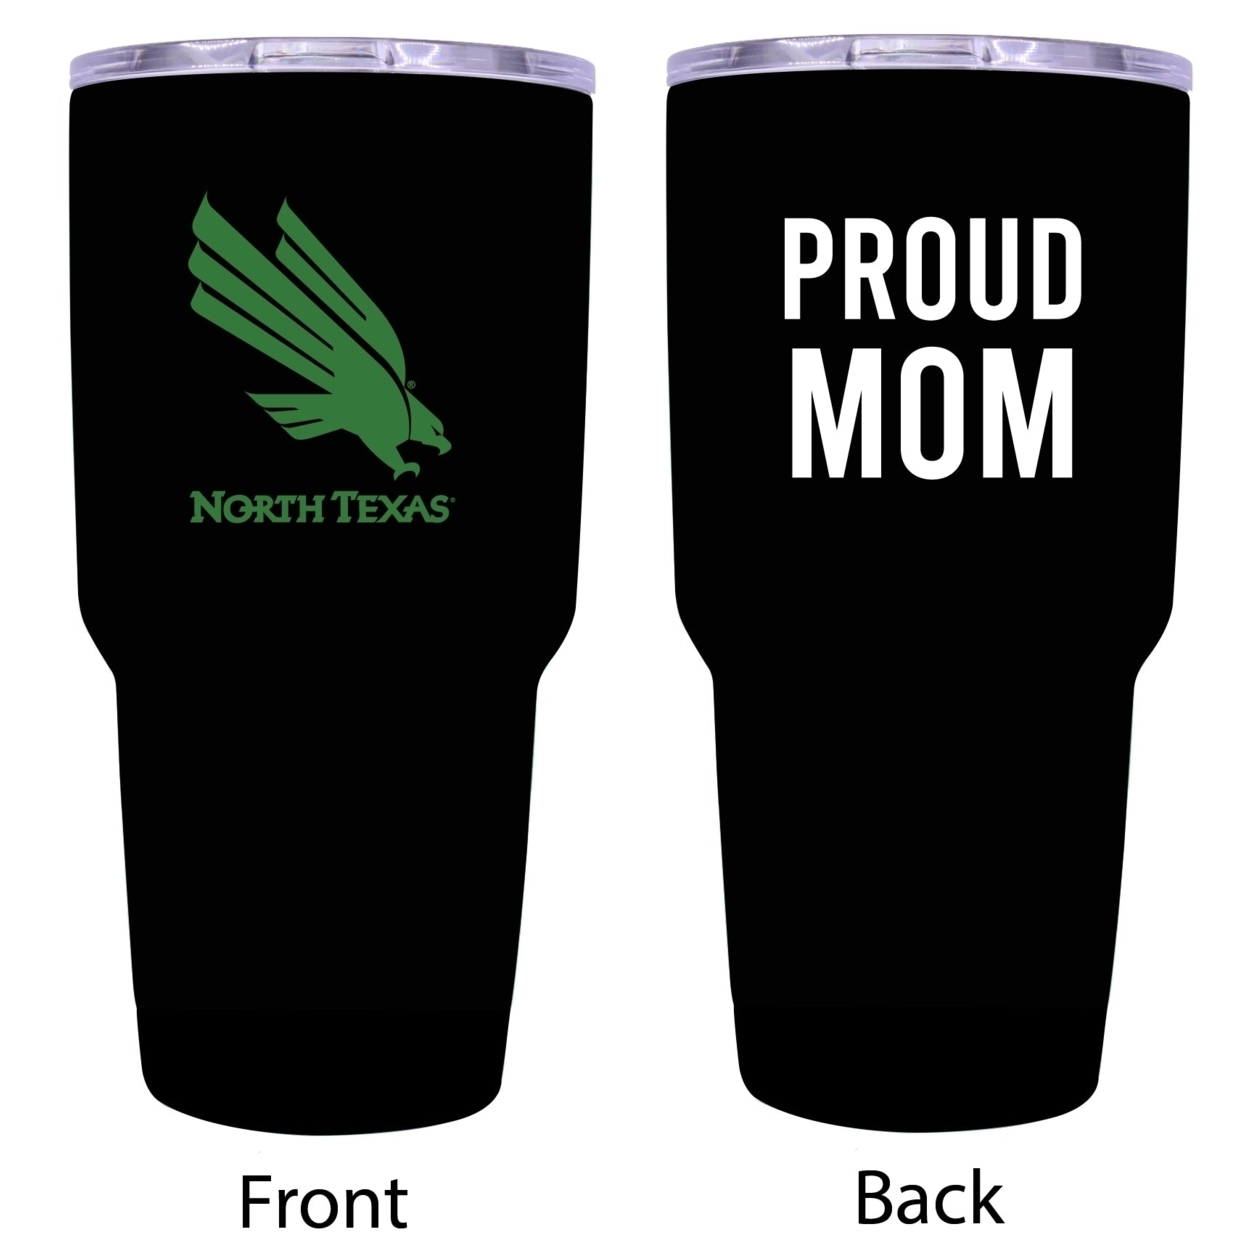 North Texas Proud Mom 24 Oz Insulated Stainless Steel Tumbler